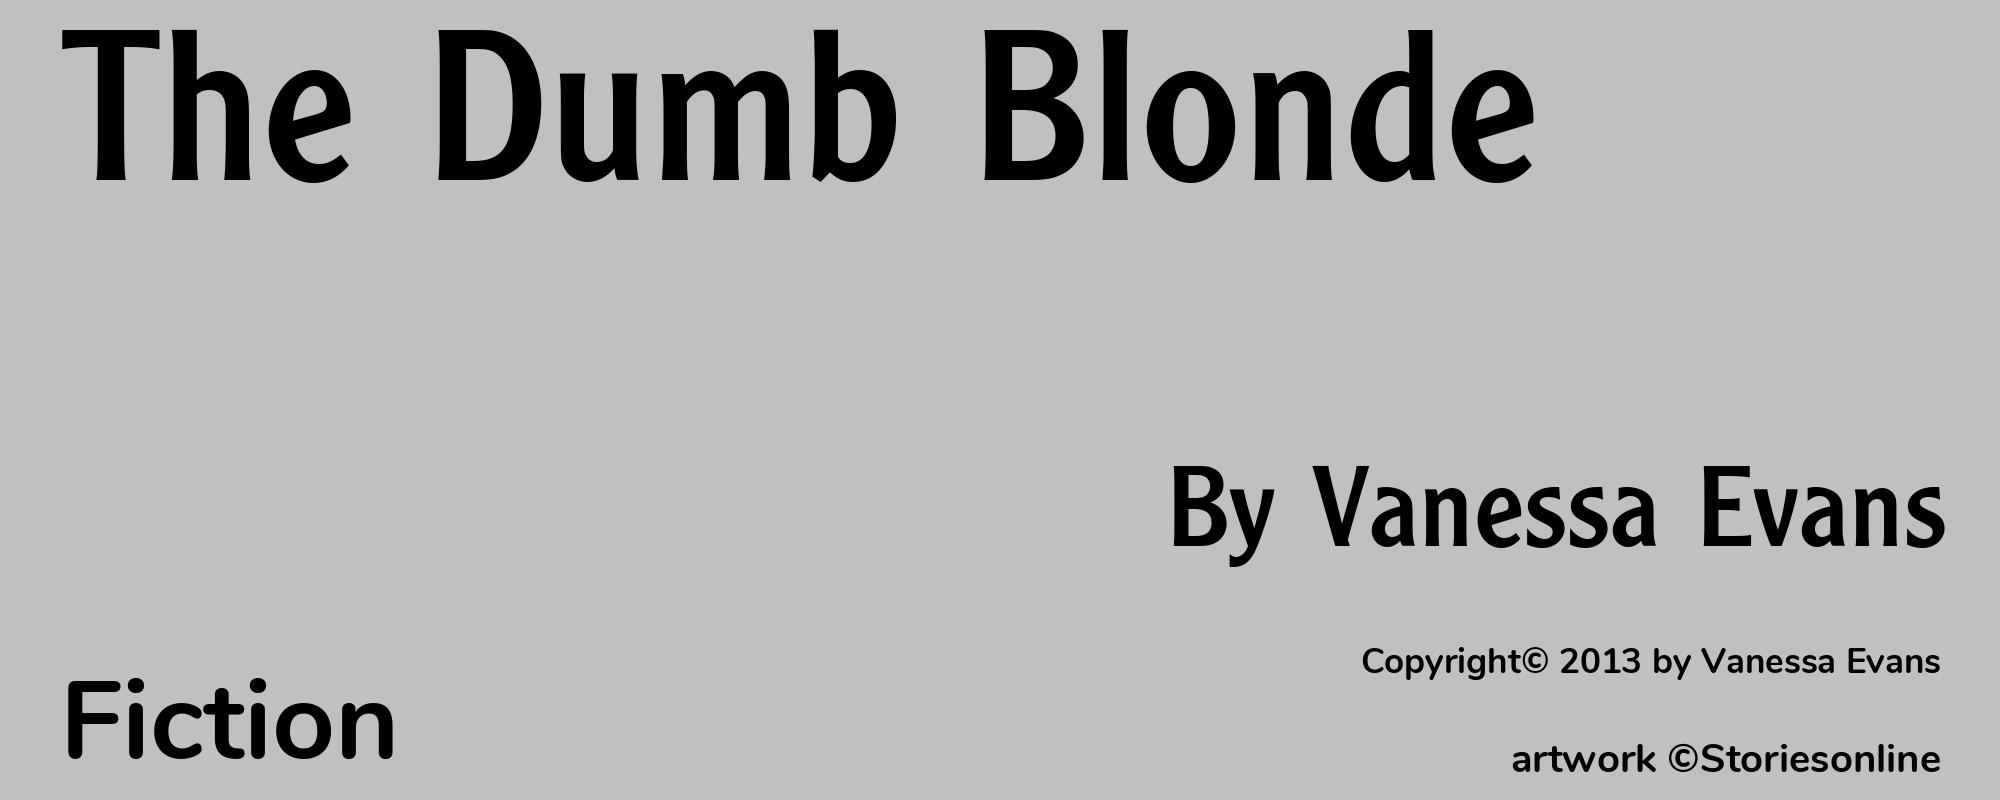 The Dumb Blonde - Cover